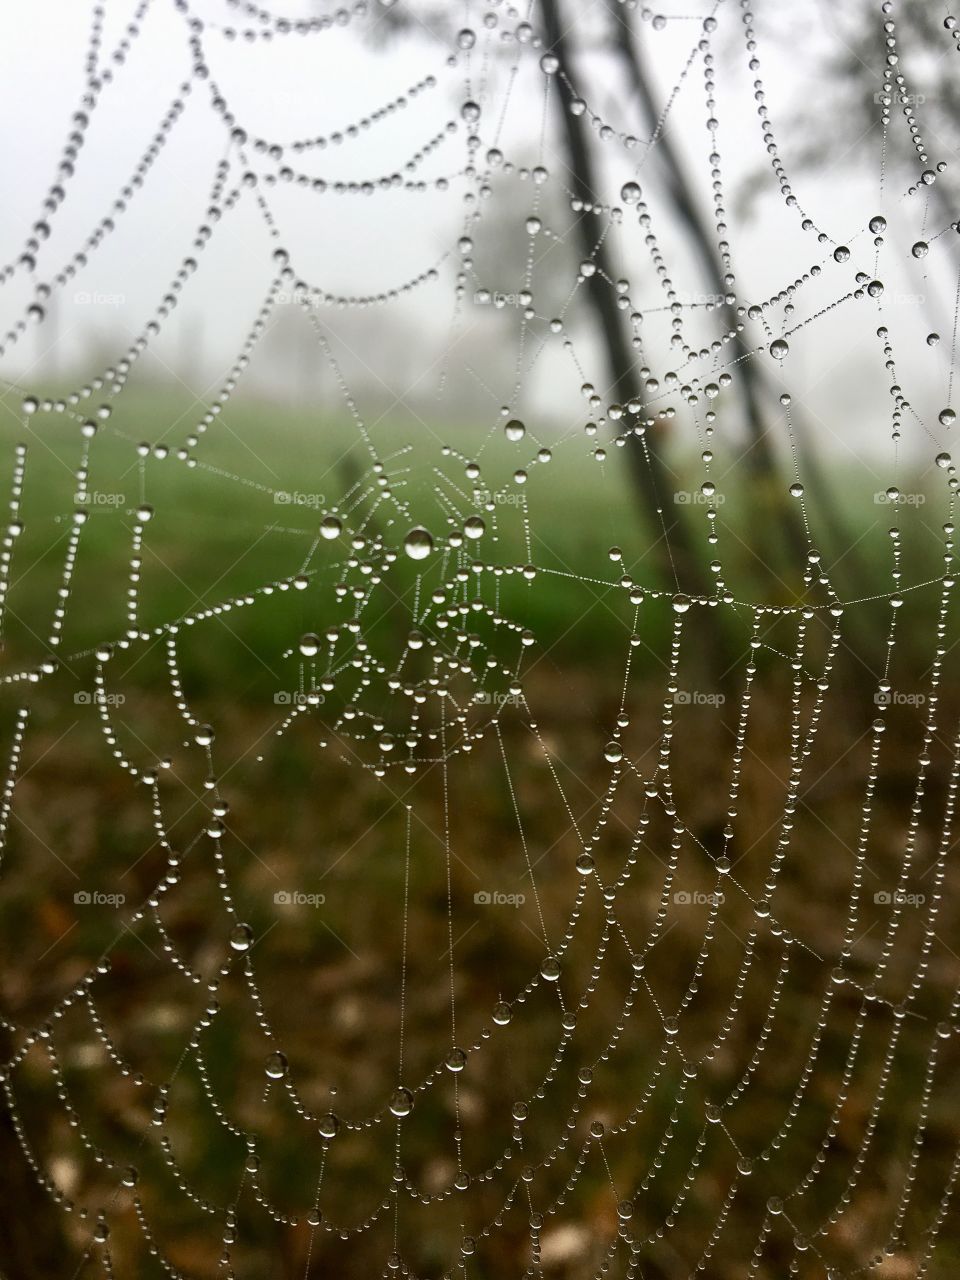 Spiderweb with waterdrops on foggy landscape 